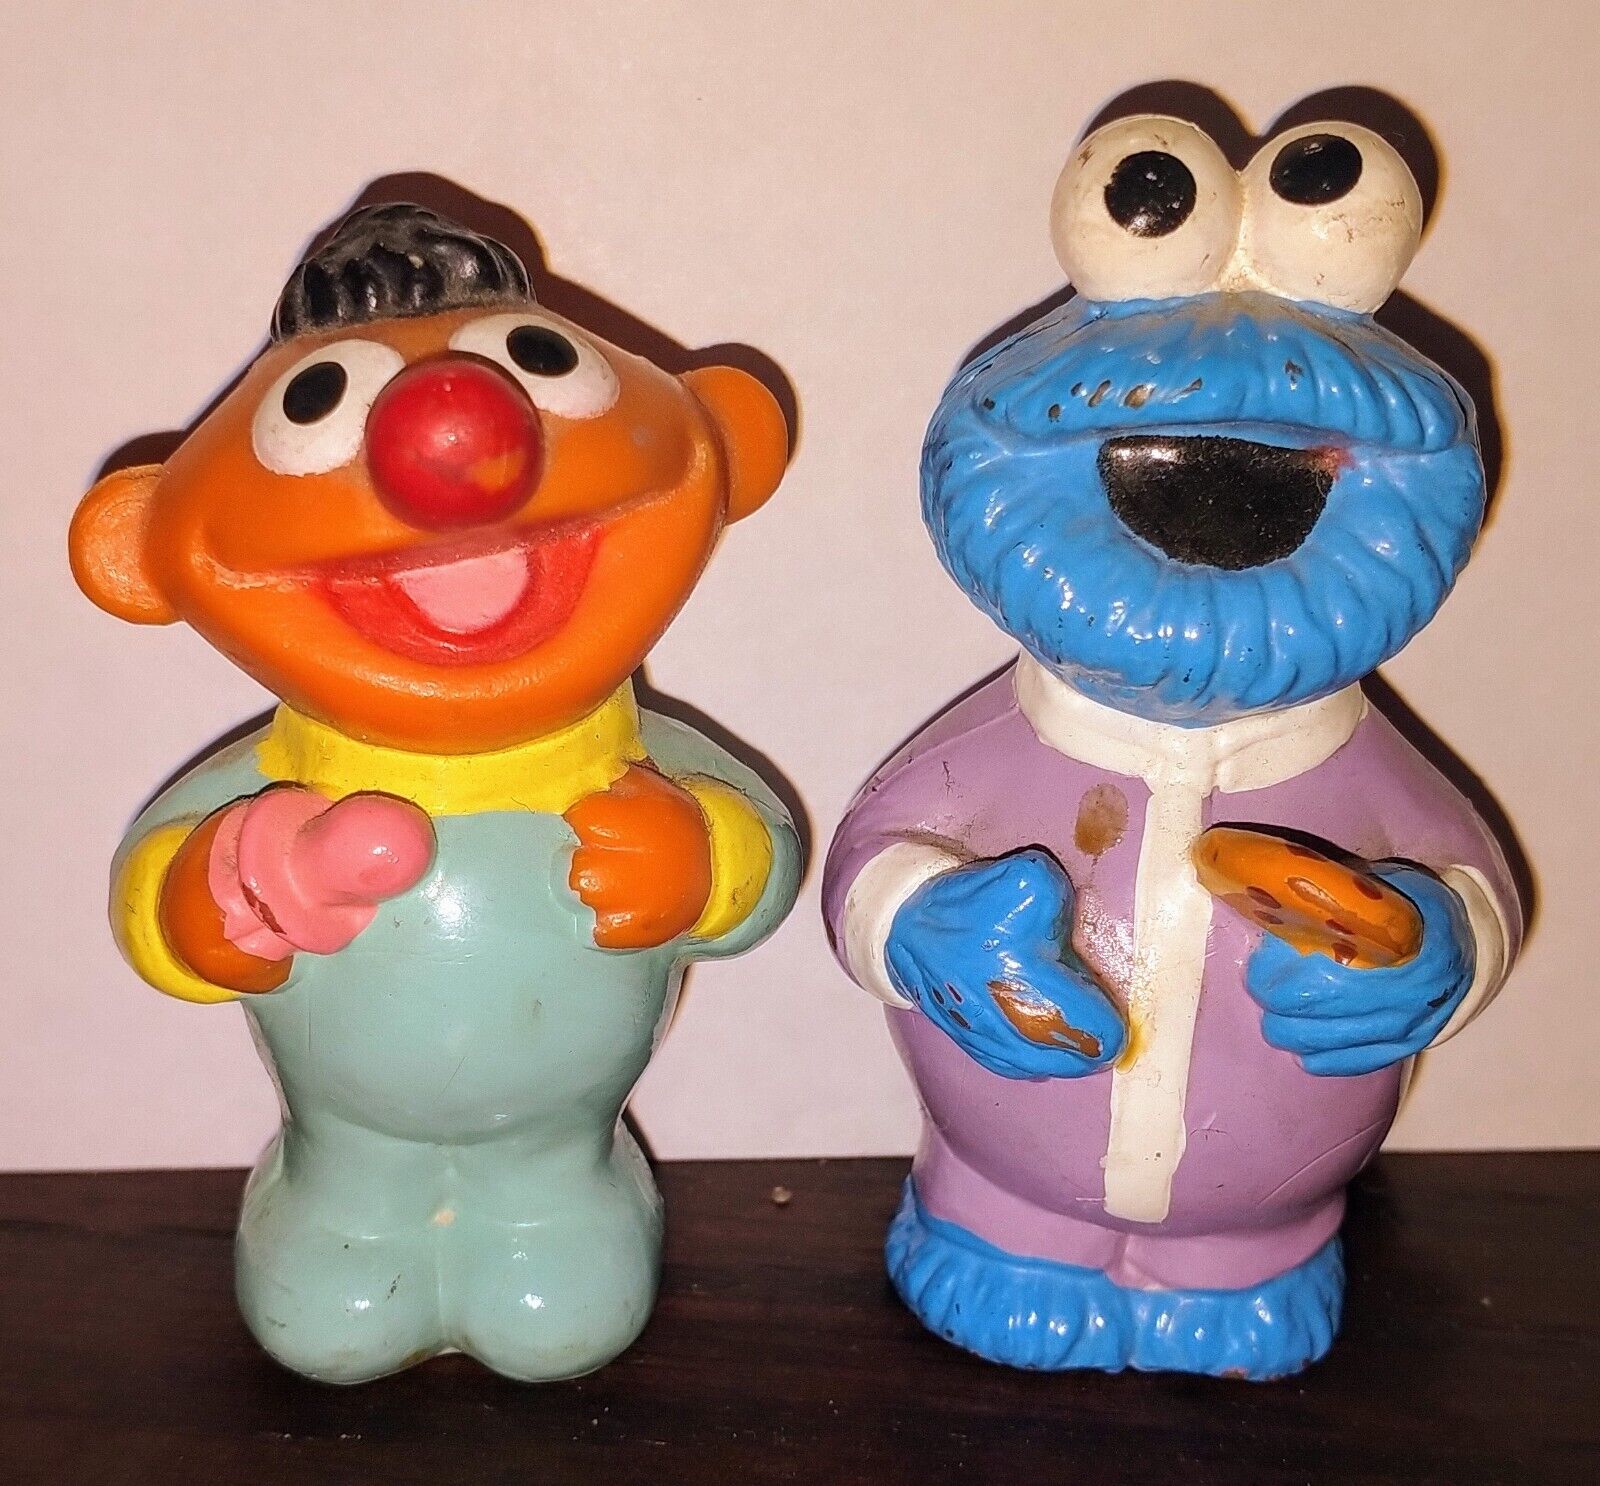 'SESAME STREET BABIES' PVC (LOT OF 2) ERNIE & COOKIE MONSTER 1992 THE MUPPETS